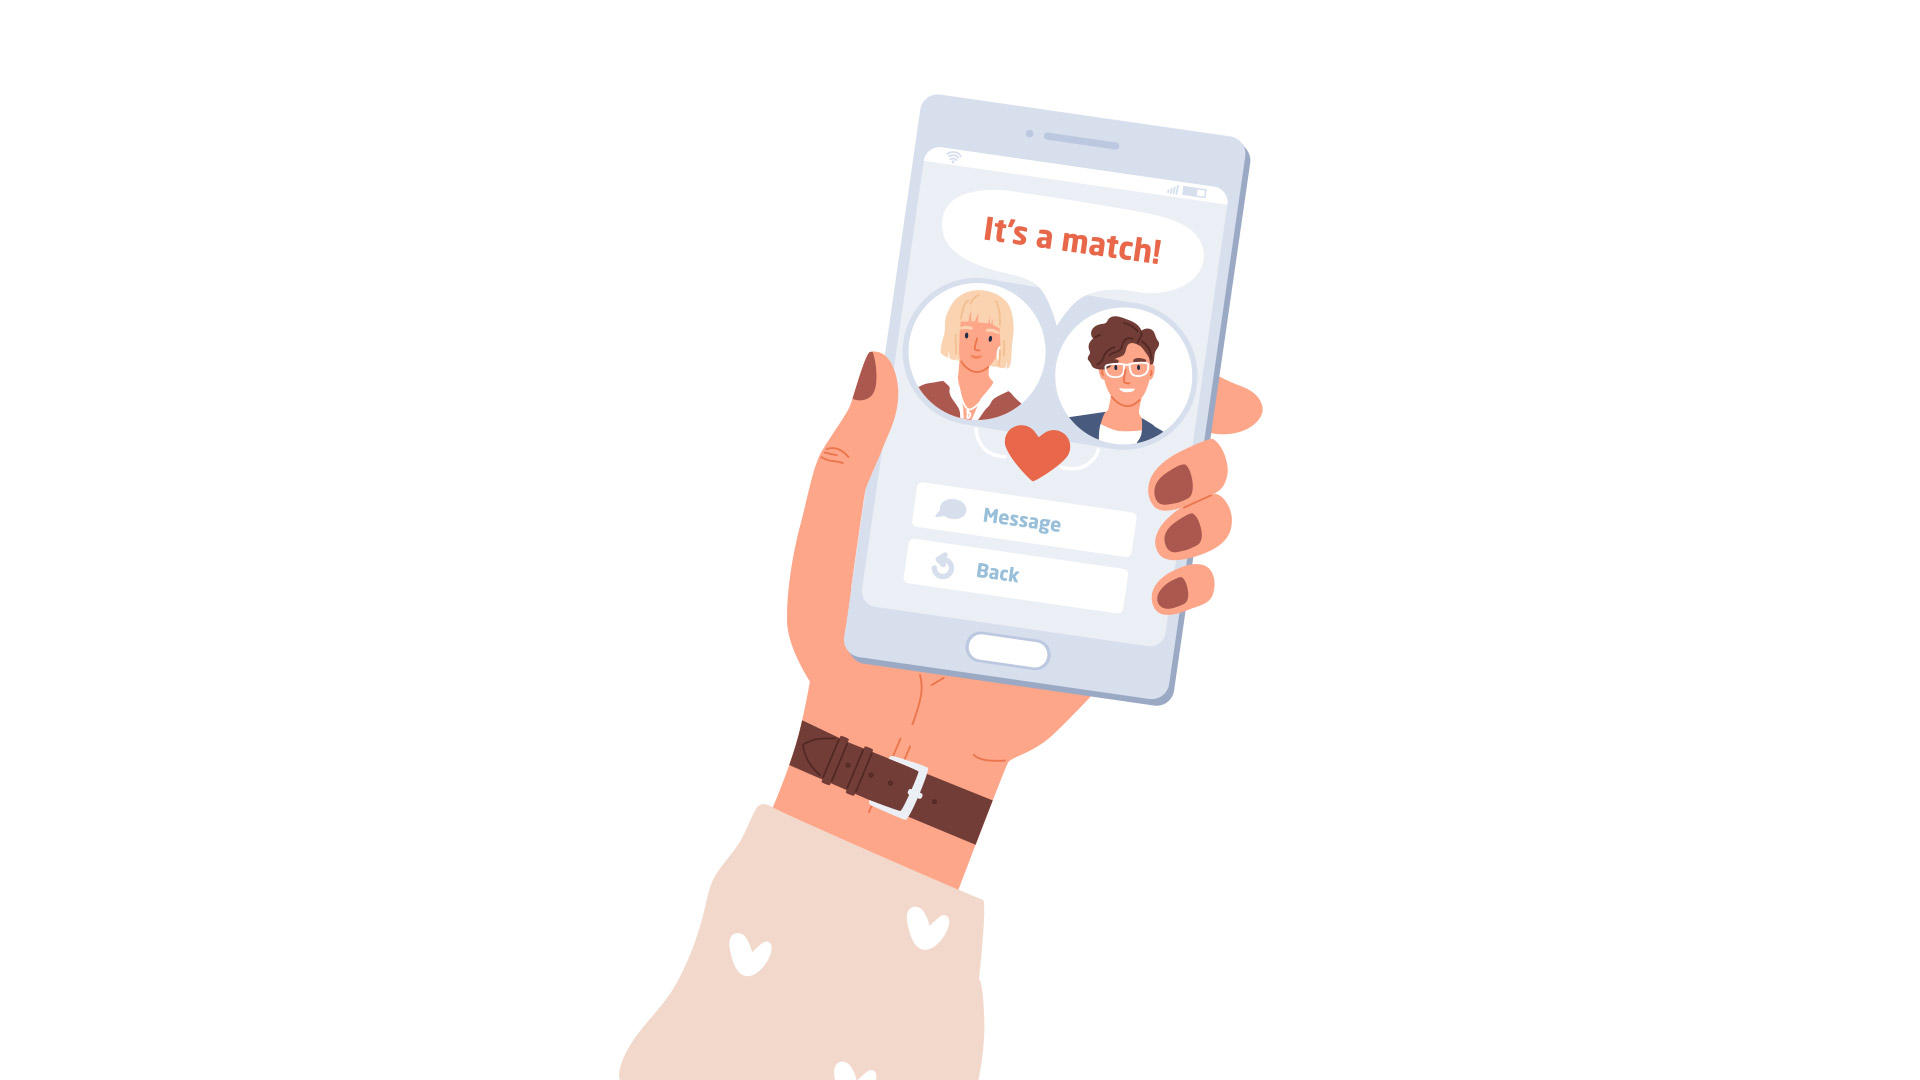 Cartoon drawing of a woman's hand holding her mobile phone, the screen showing she has matched on a dating app.